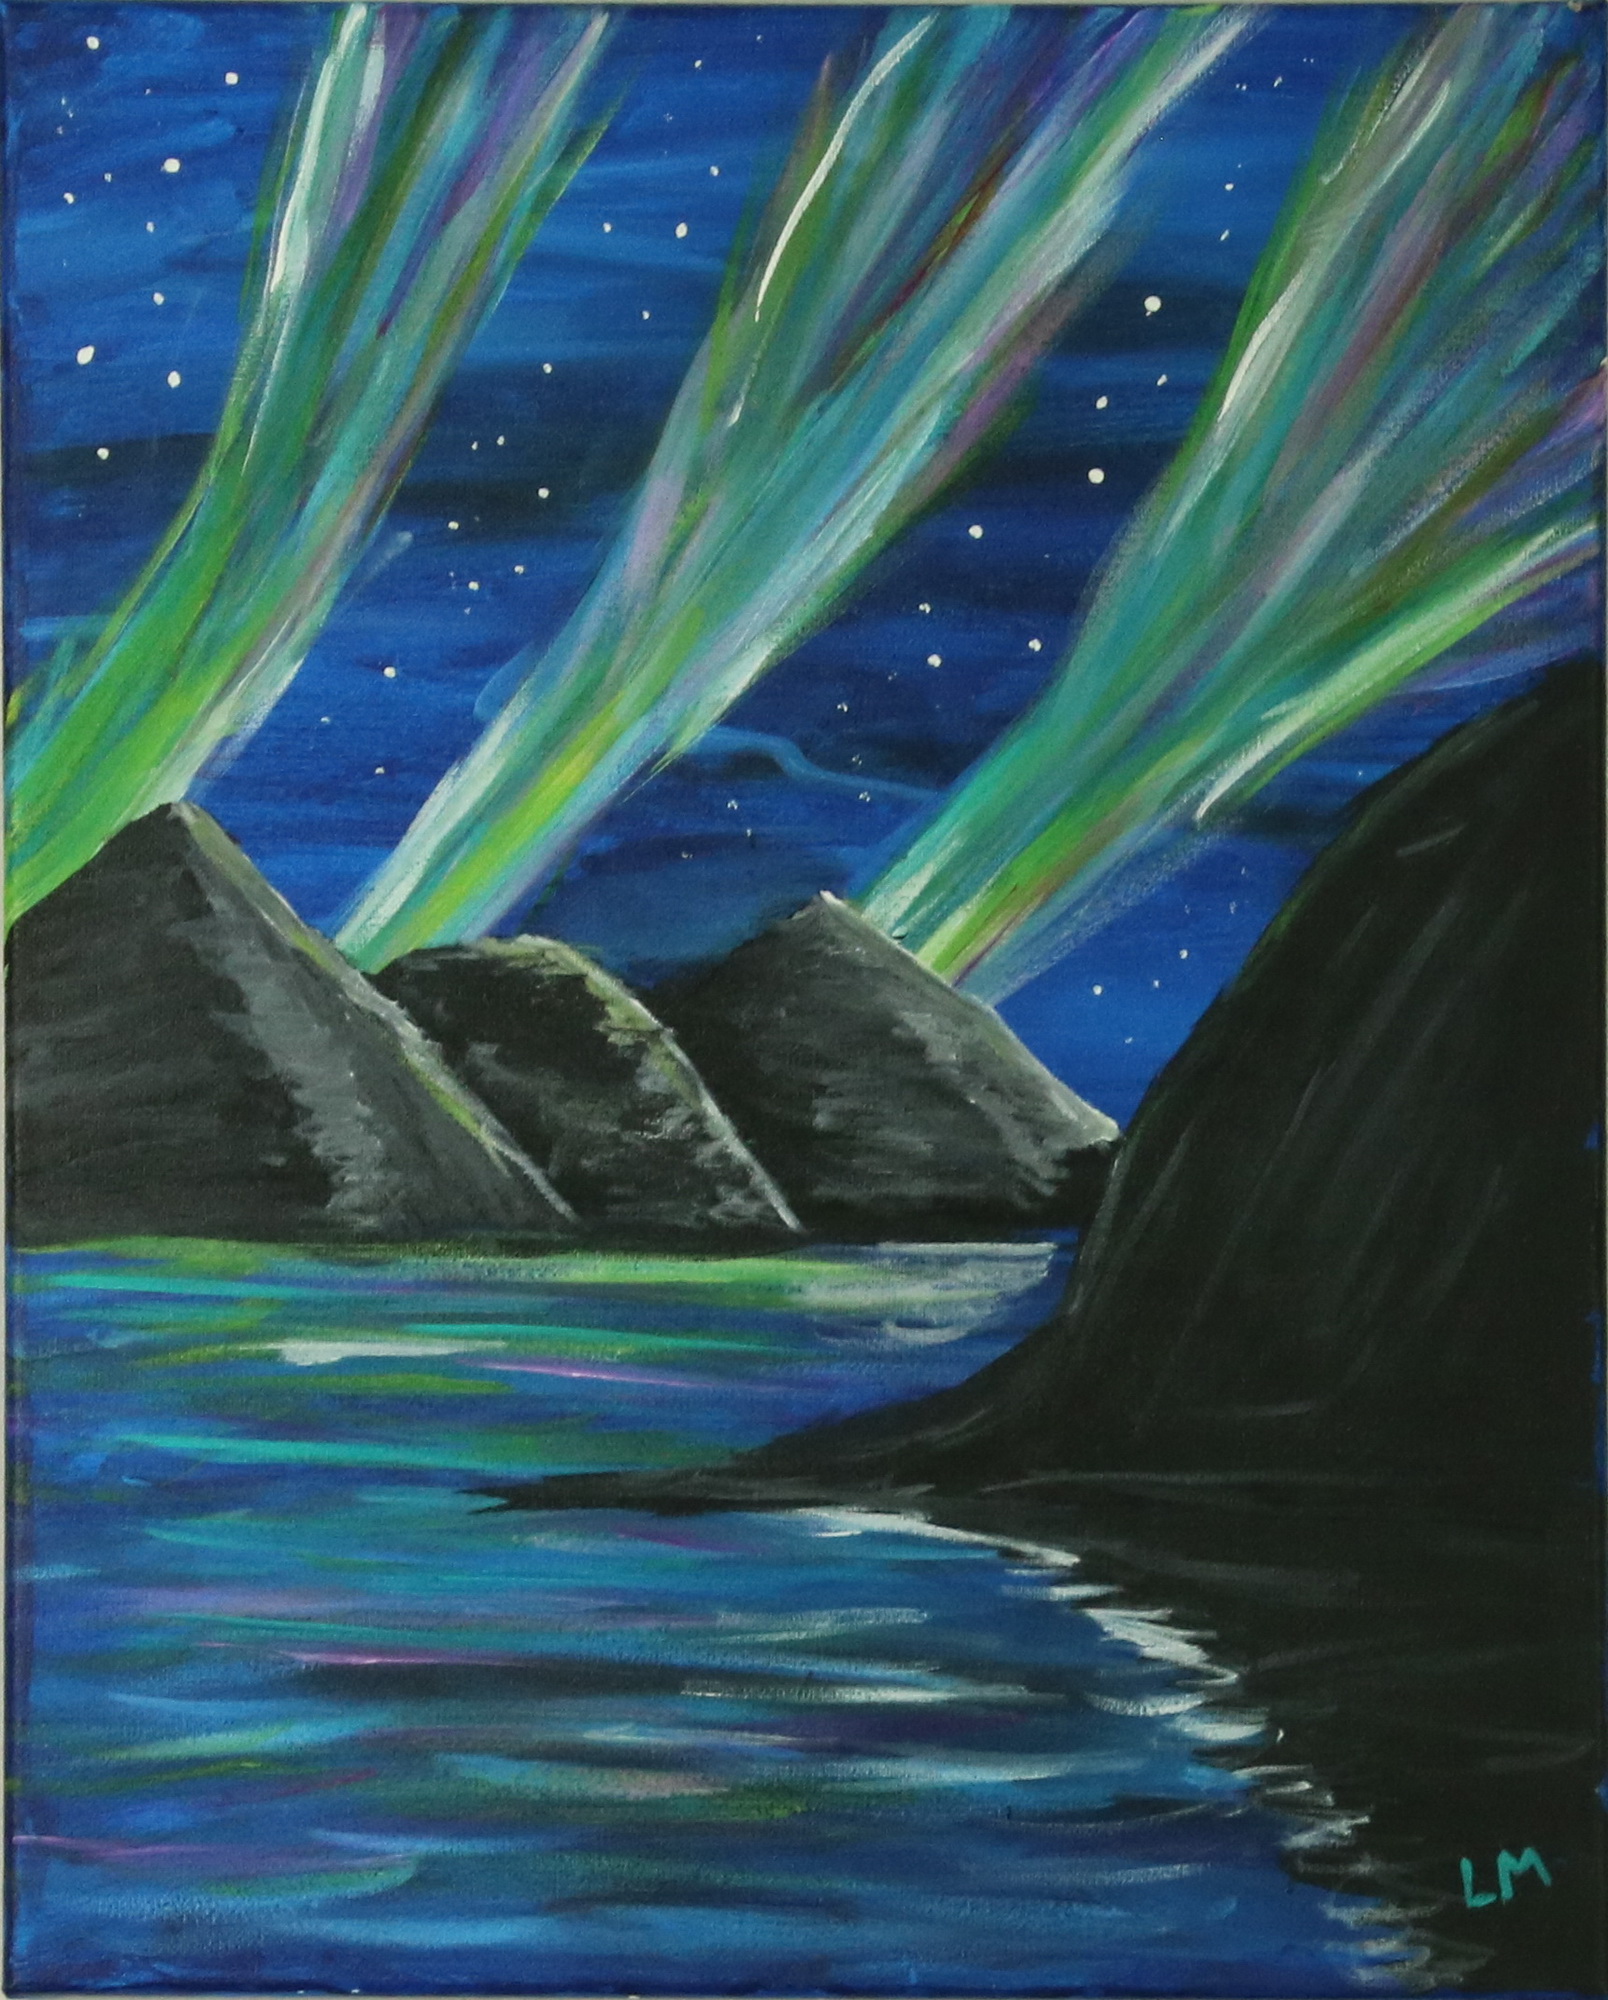 Northern Lights - 2020<br/>Art studio reopened for in studio painting lessons which I went to to show support.